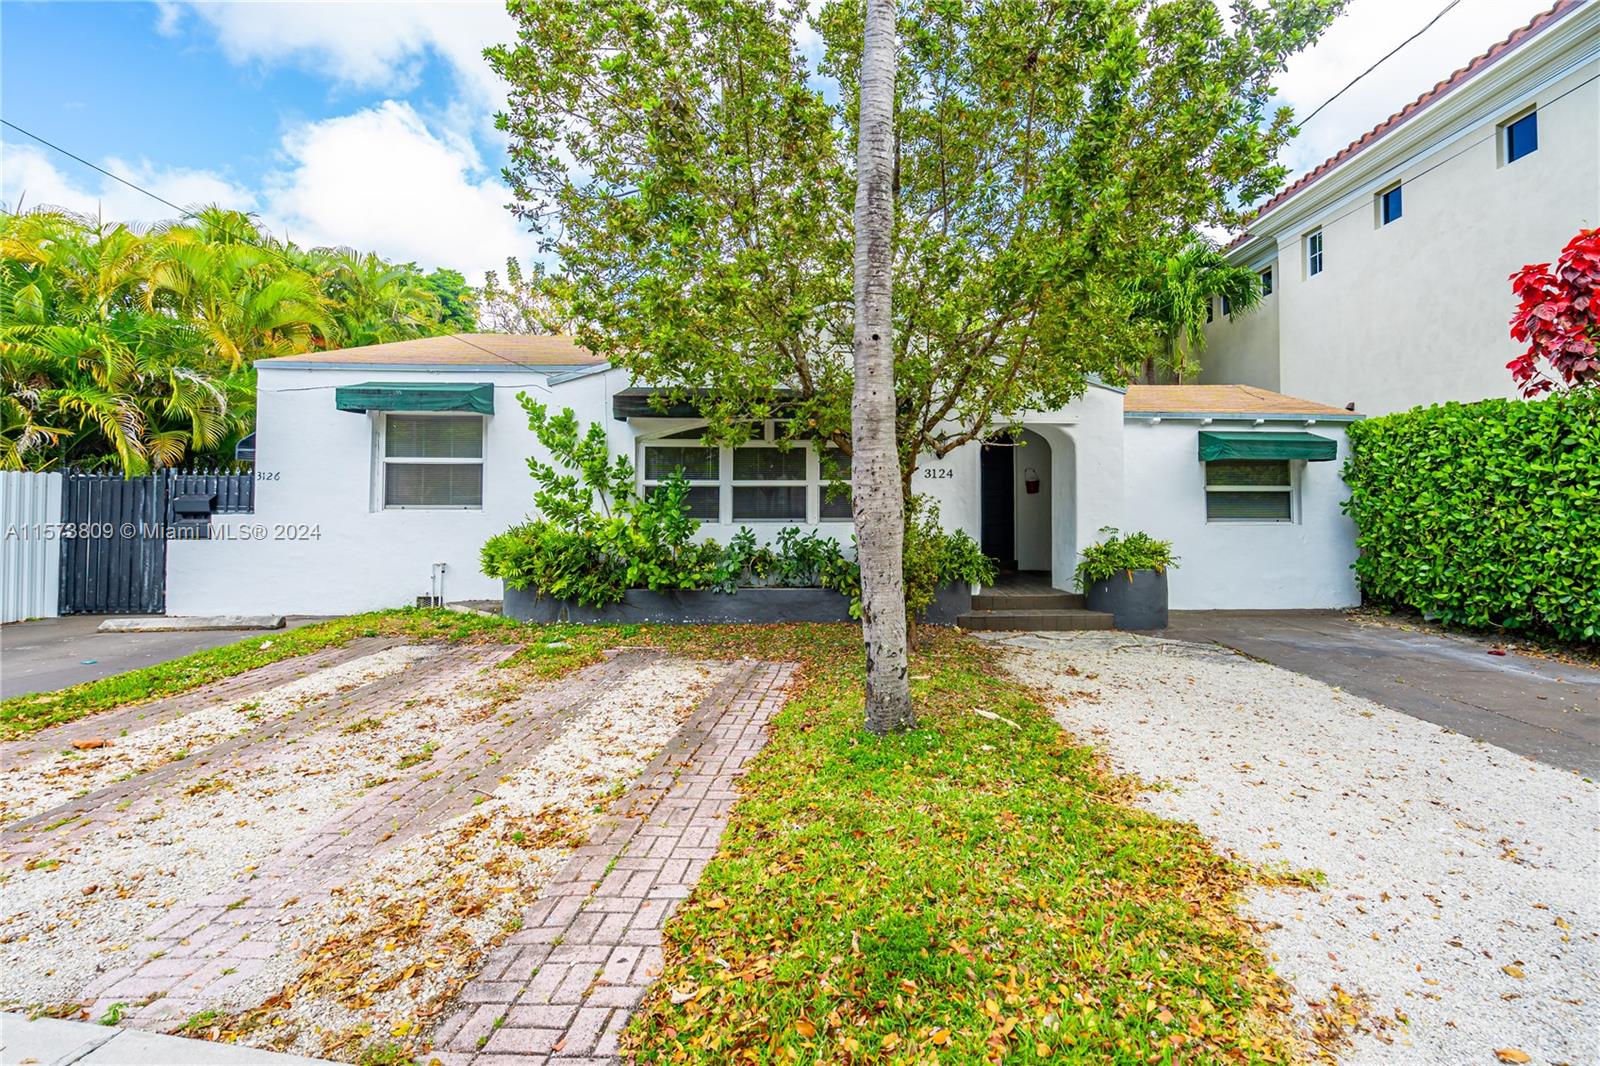 3124 SW 1st Ave Main, Miami, Florida 33129, 2 Bedrooms Bedrooms, ,1 BathroomBathrooms,Residentiallease,For Rent,3124 SW 1st Ave Main,A11573809